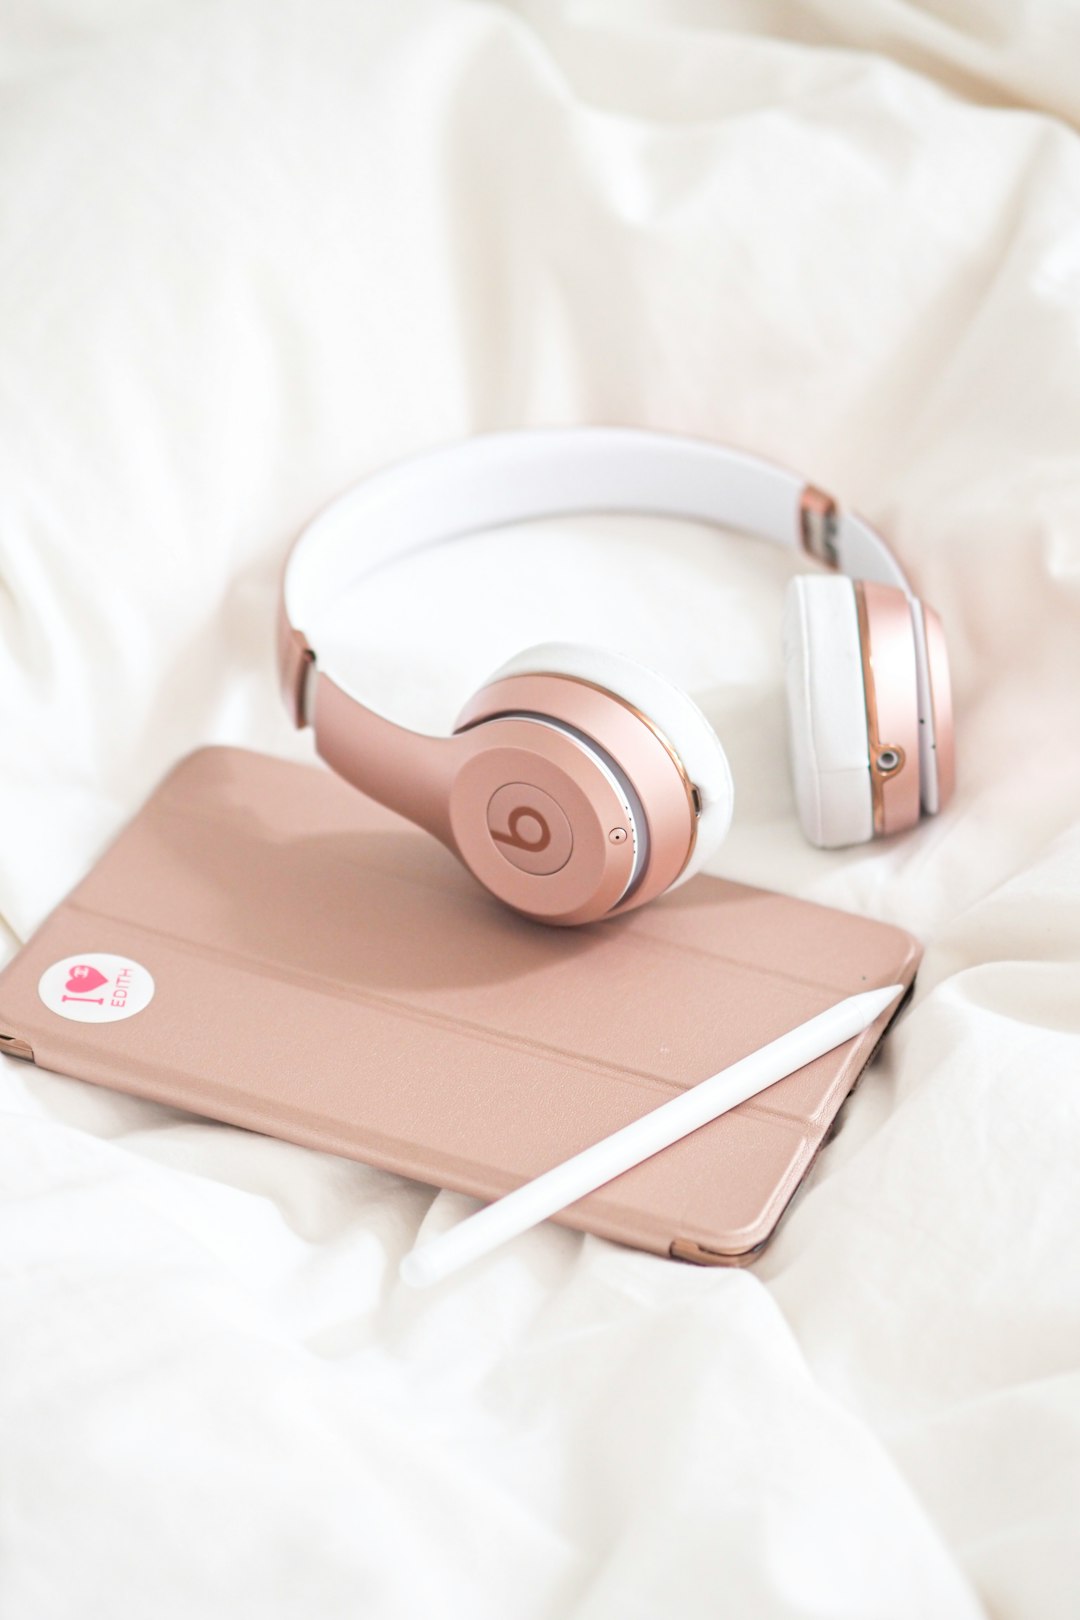 brown and white beats by dr dre headphones on white ipad